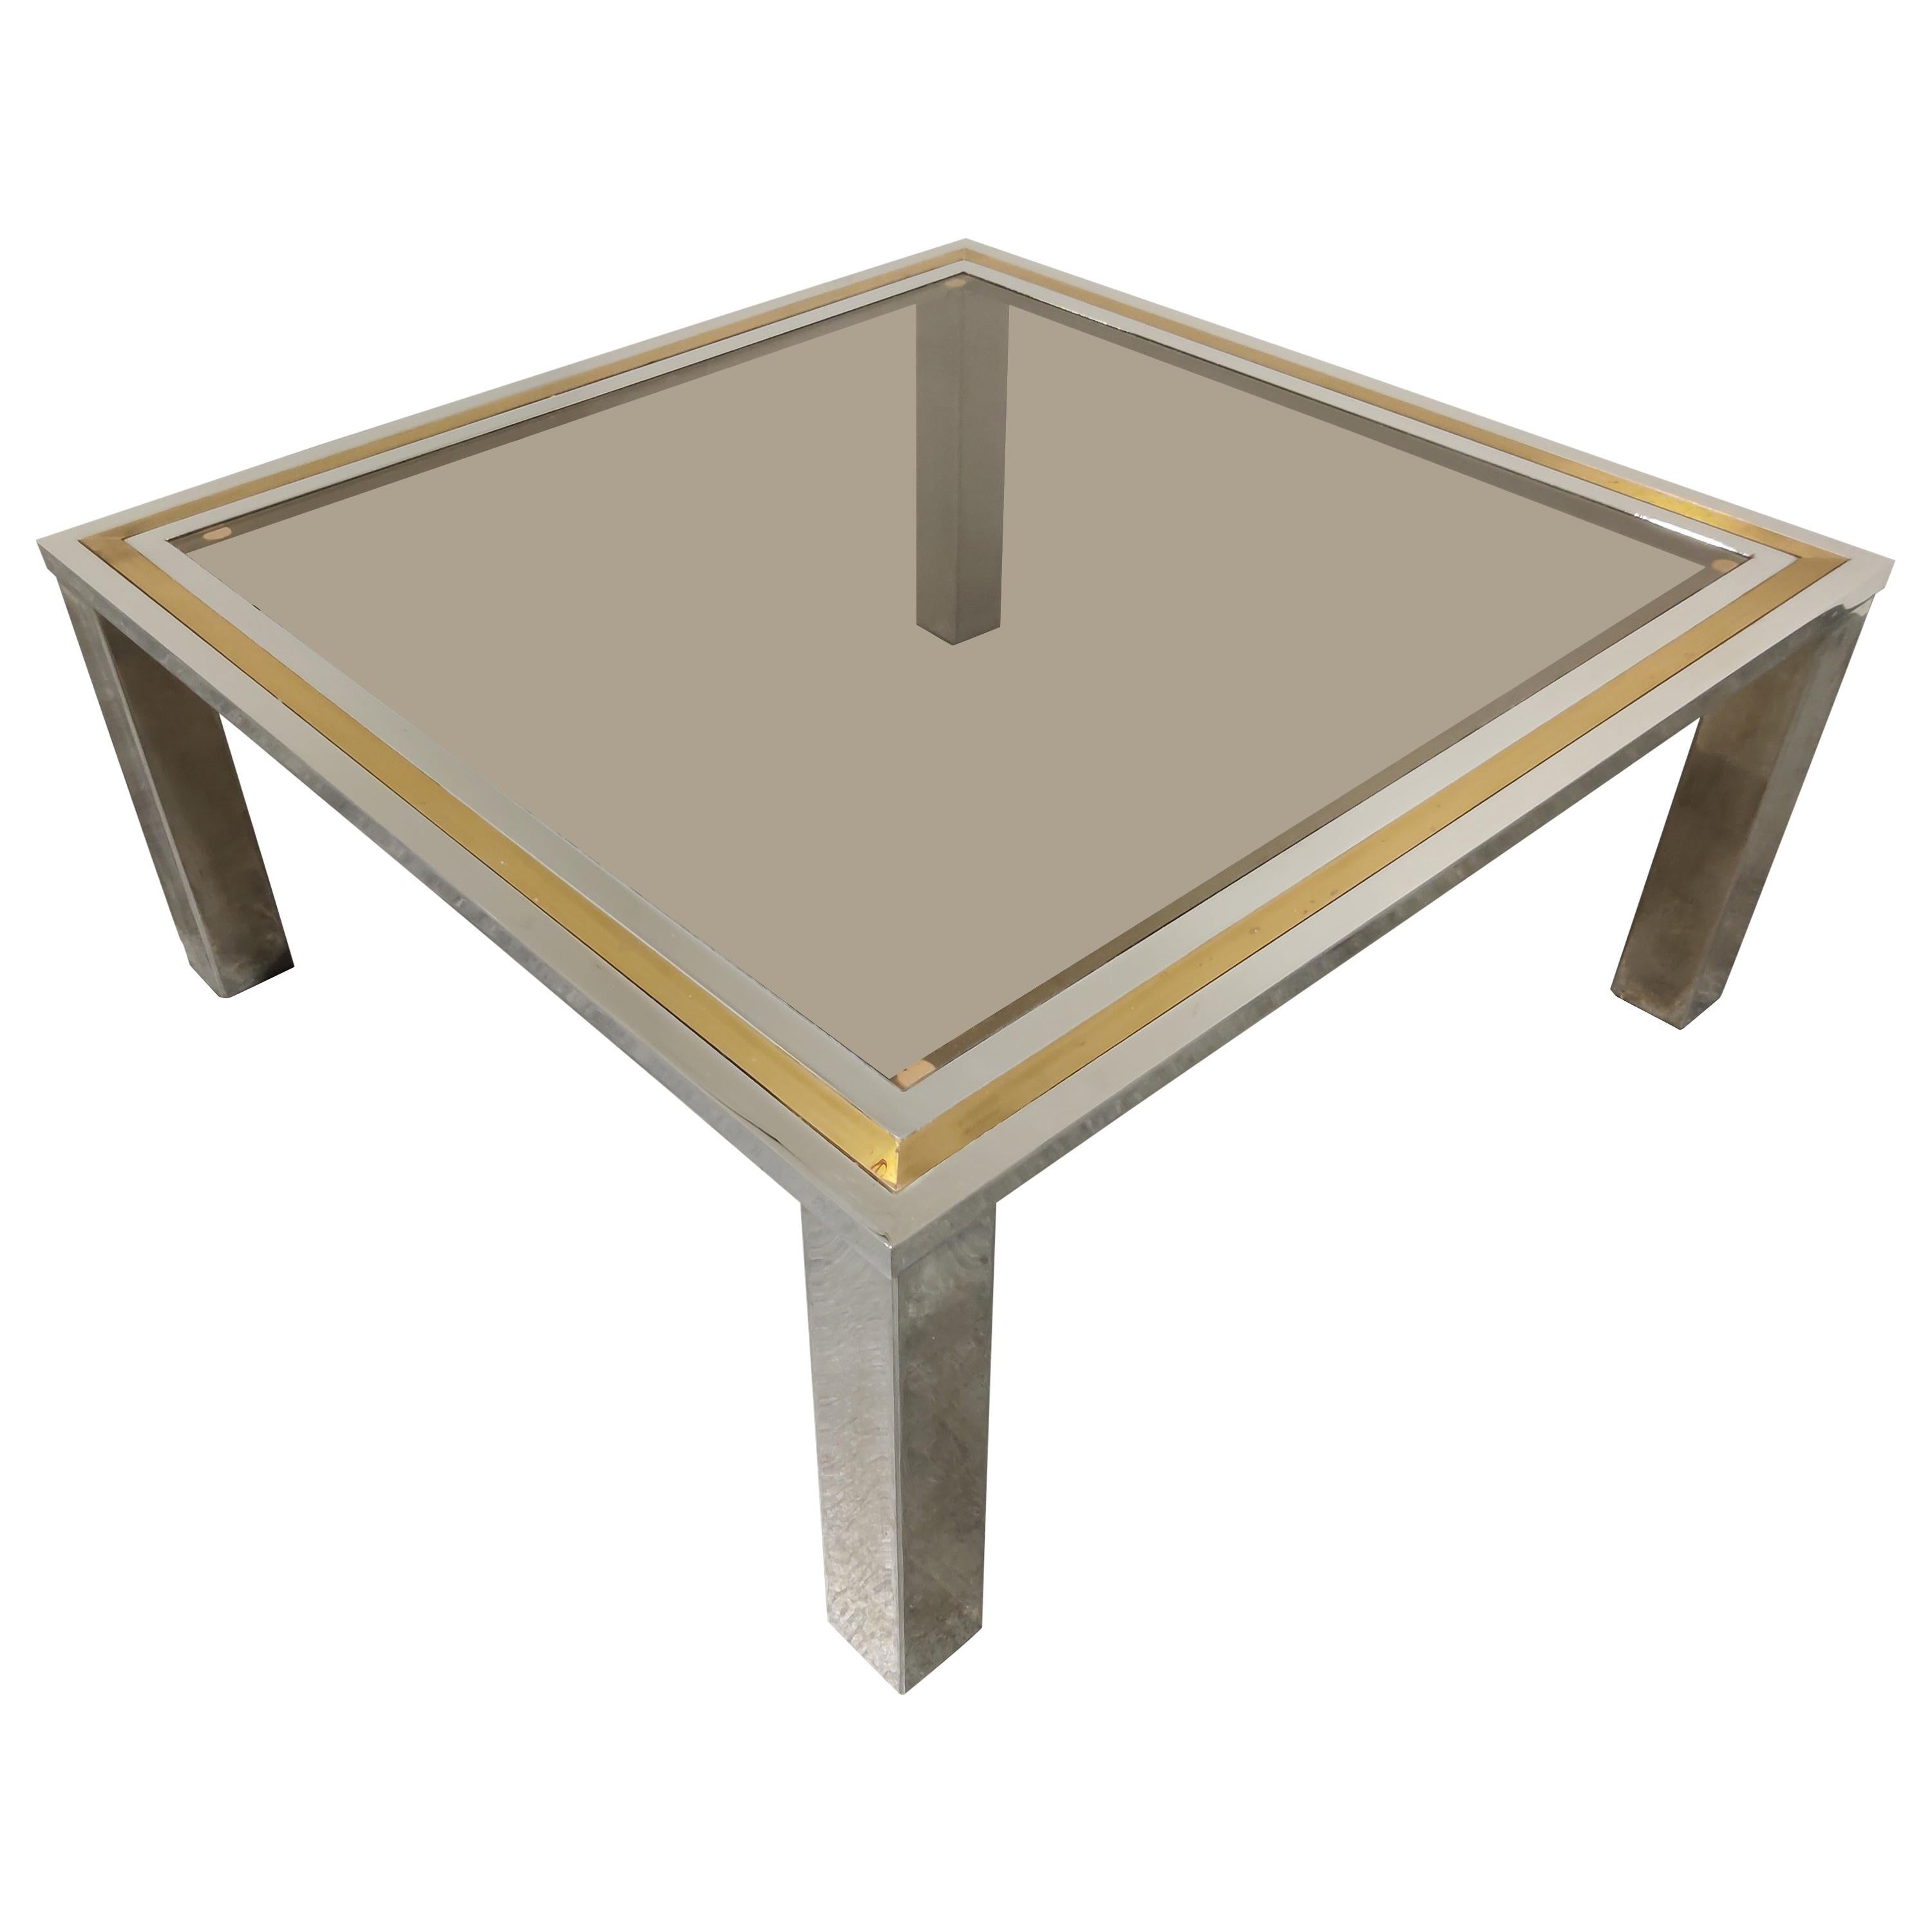 Vintage Chrome and Brass Coffee Table, 1970s